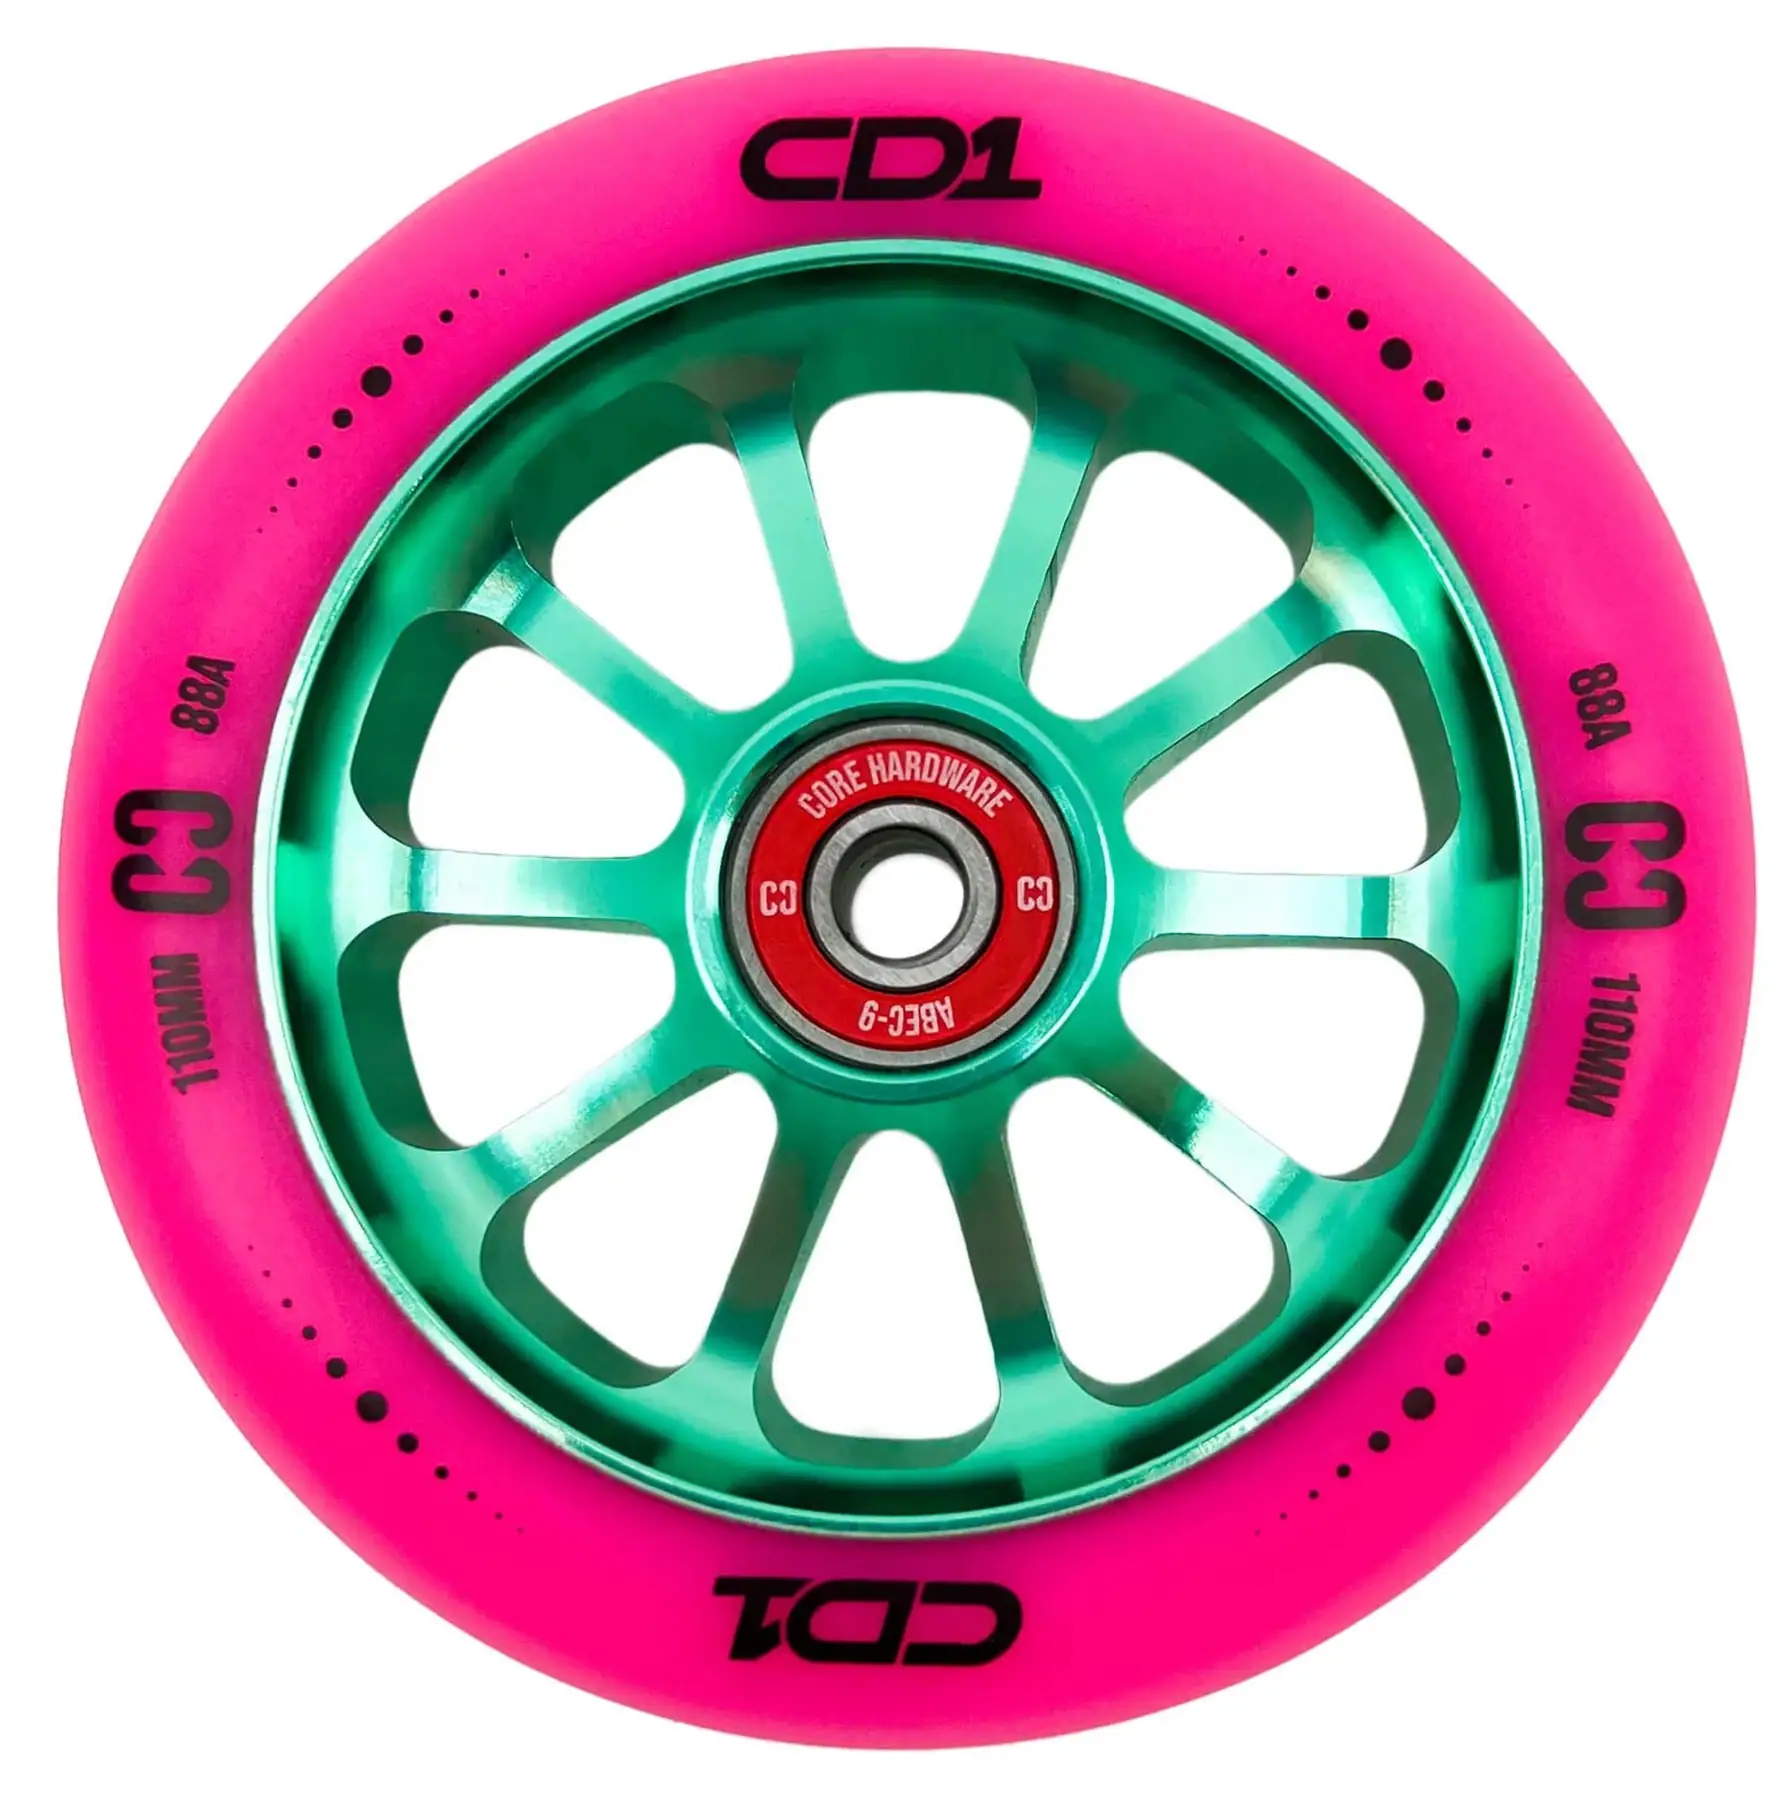 CORE CD1 Pro Scooter  110mm Wheel - Pink